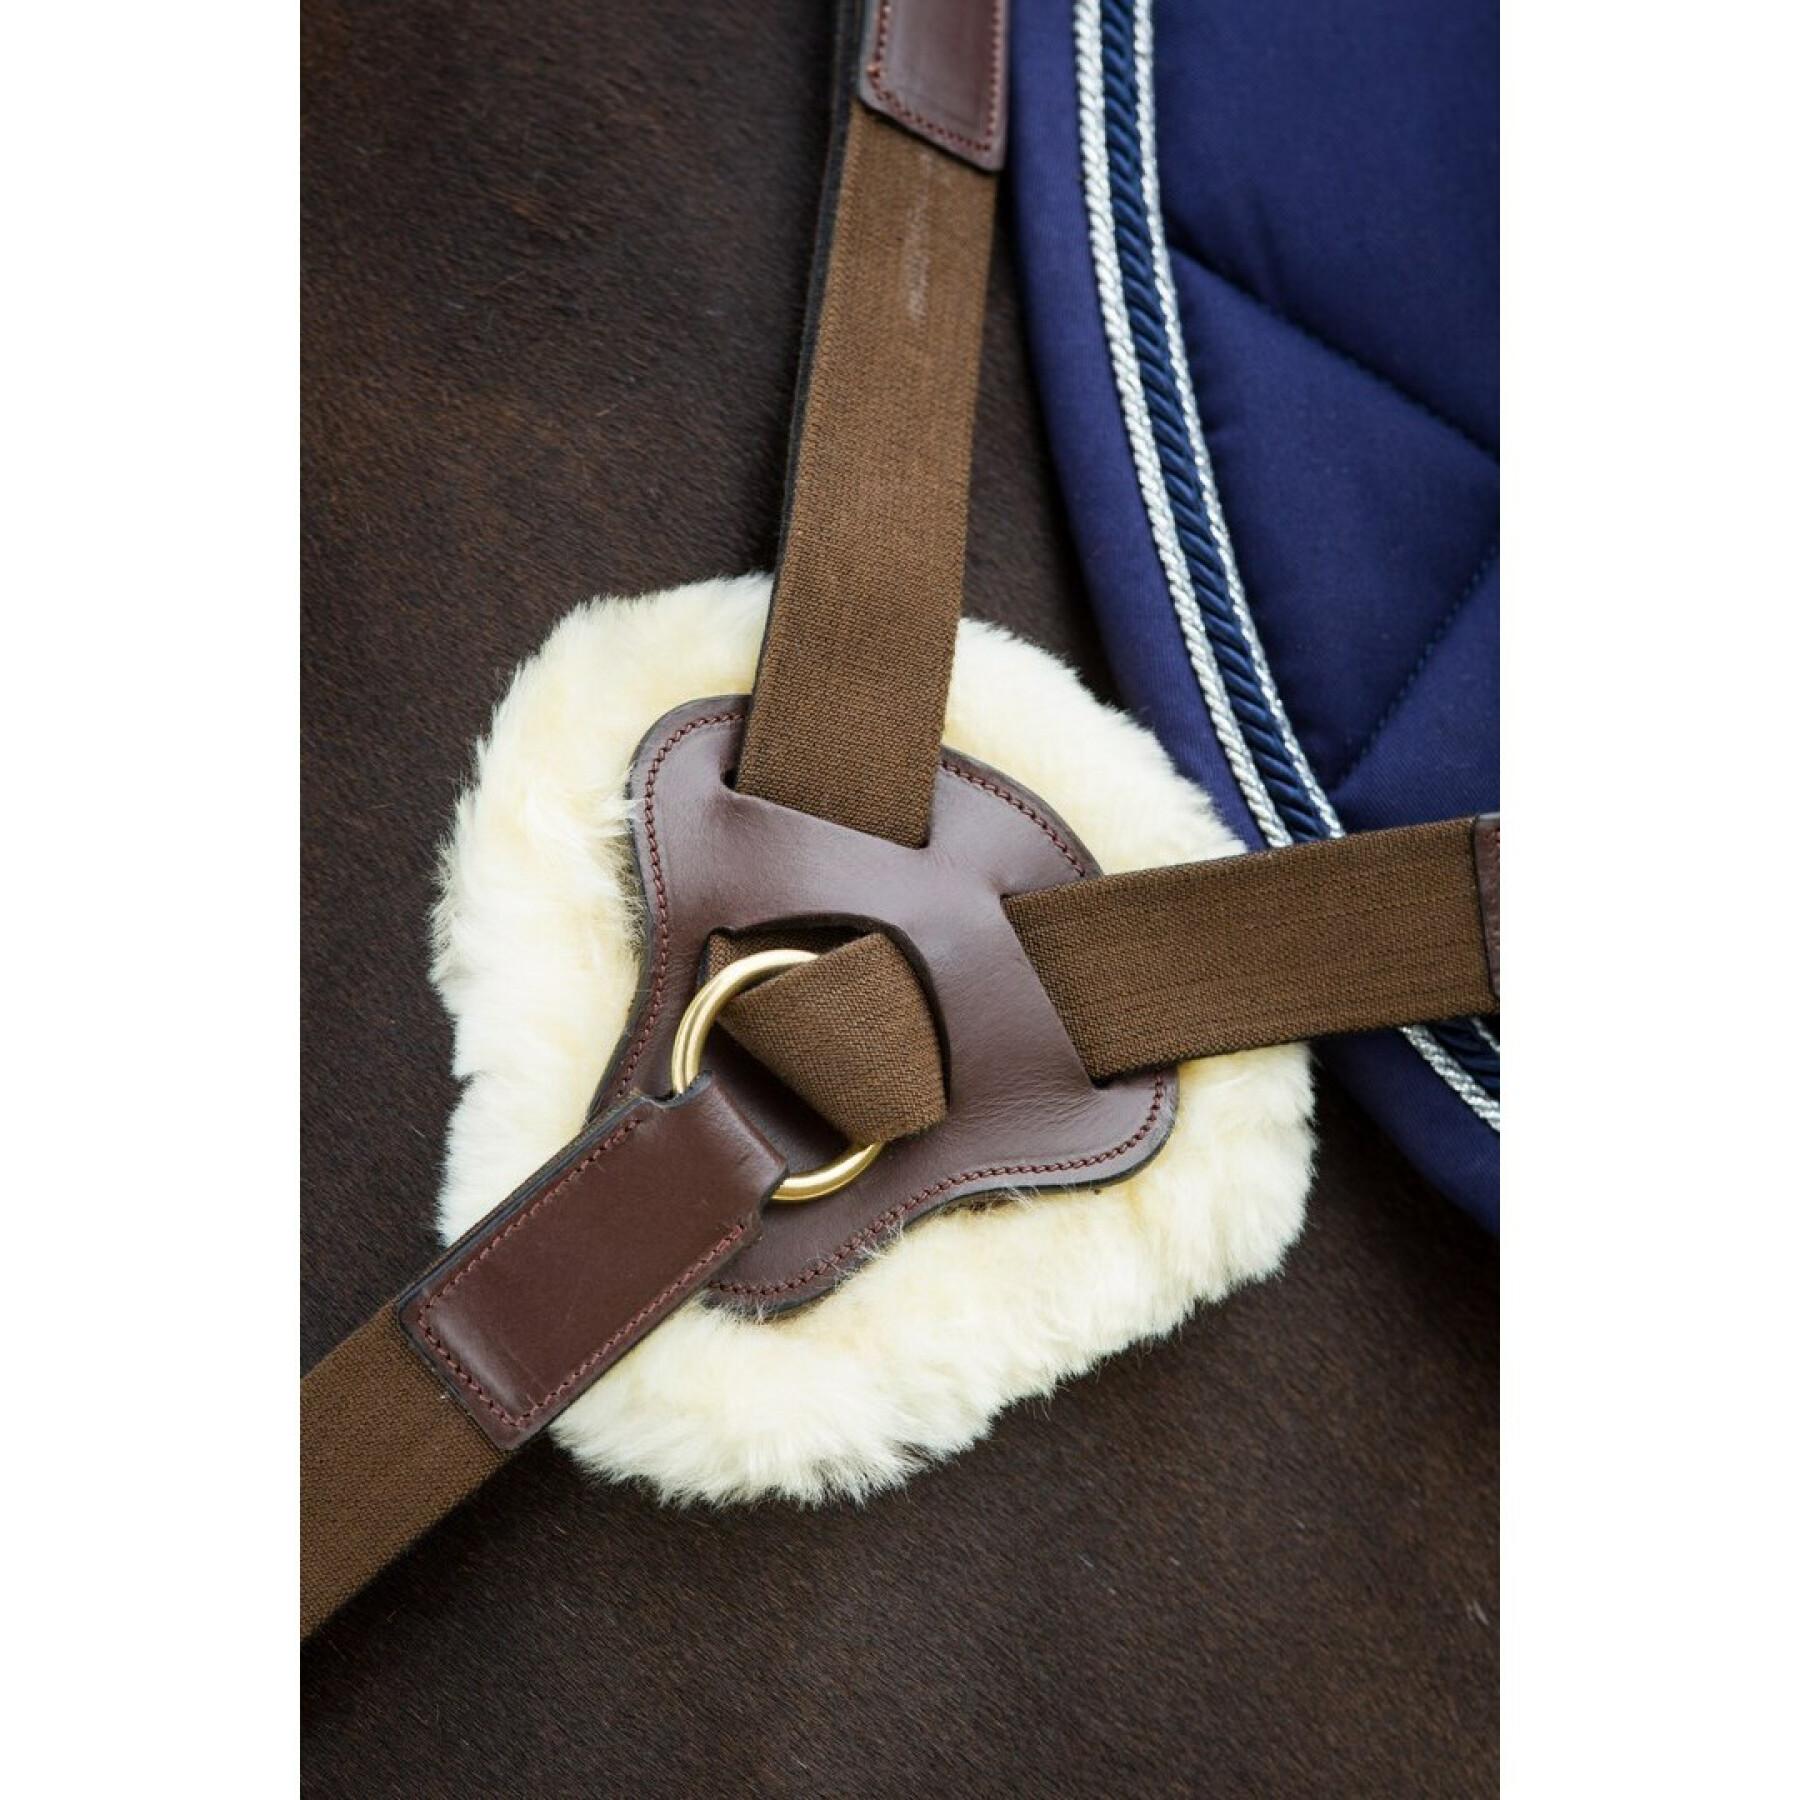 Hunting collar for horse HFI 5 Points